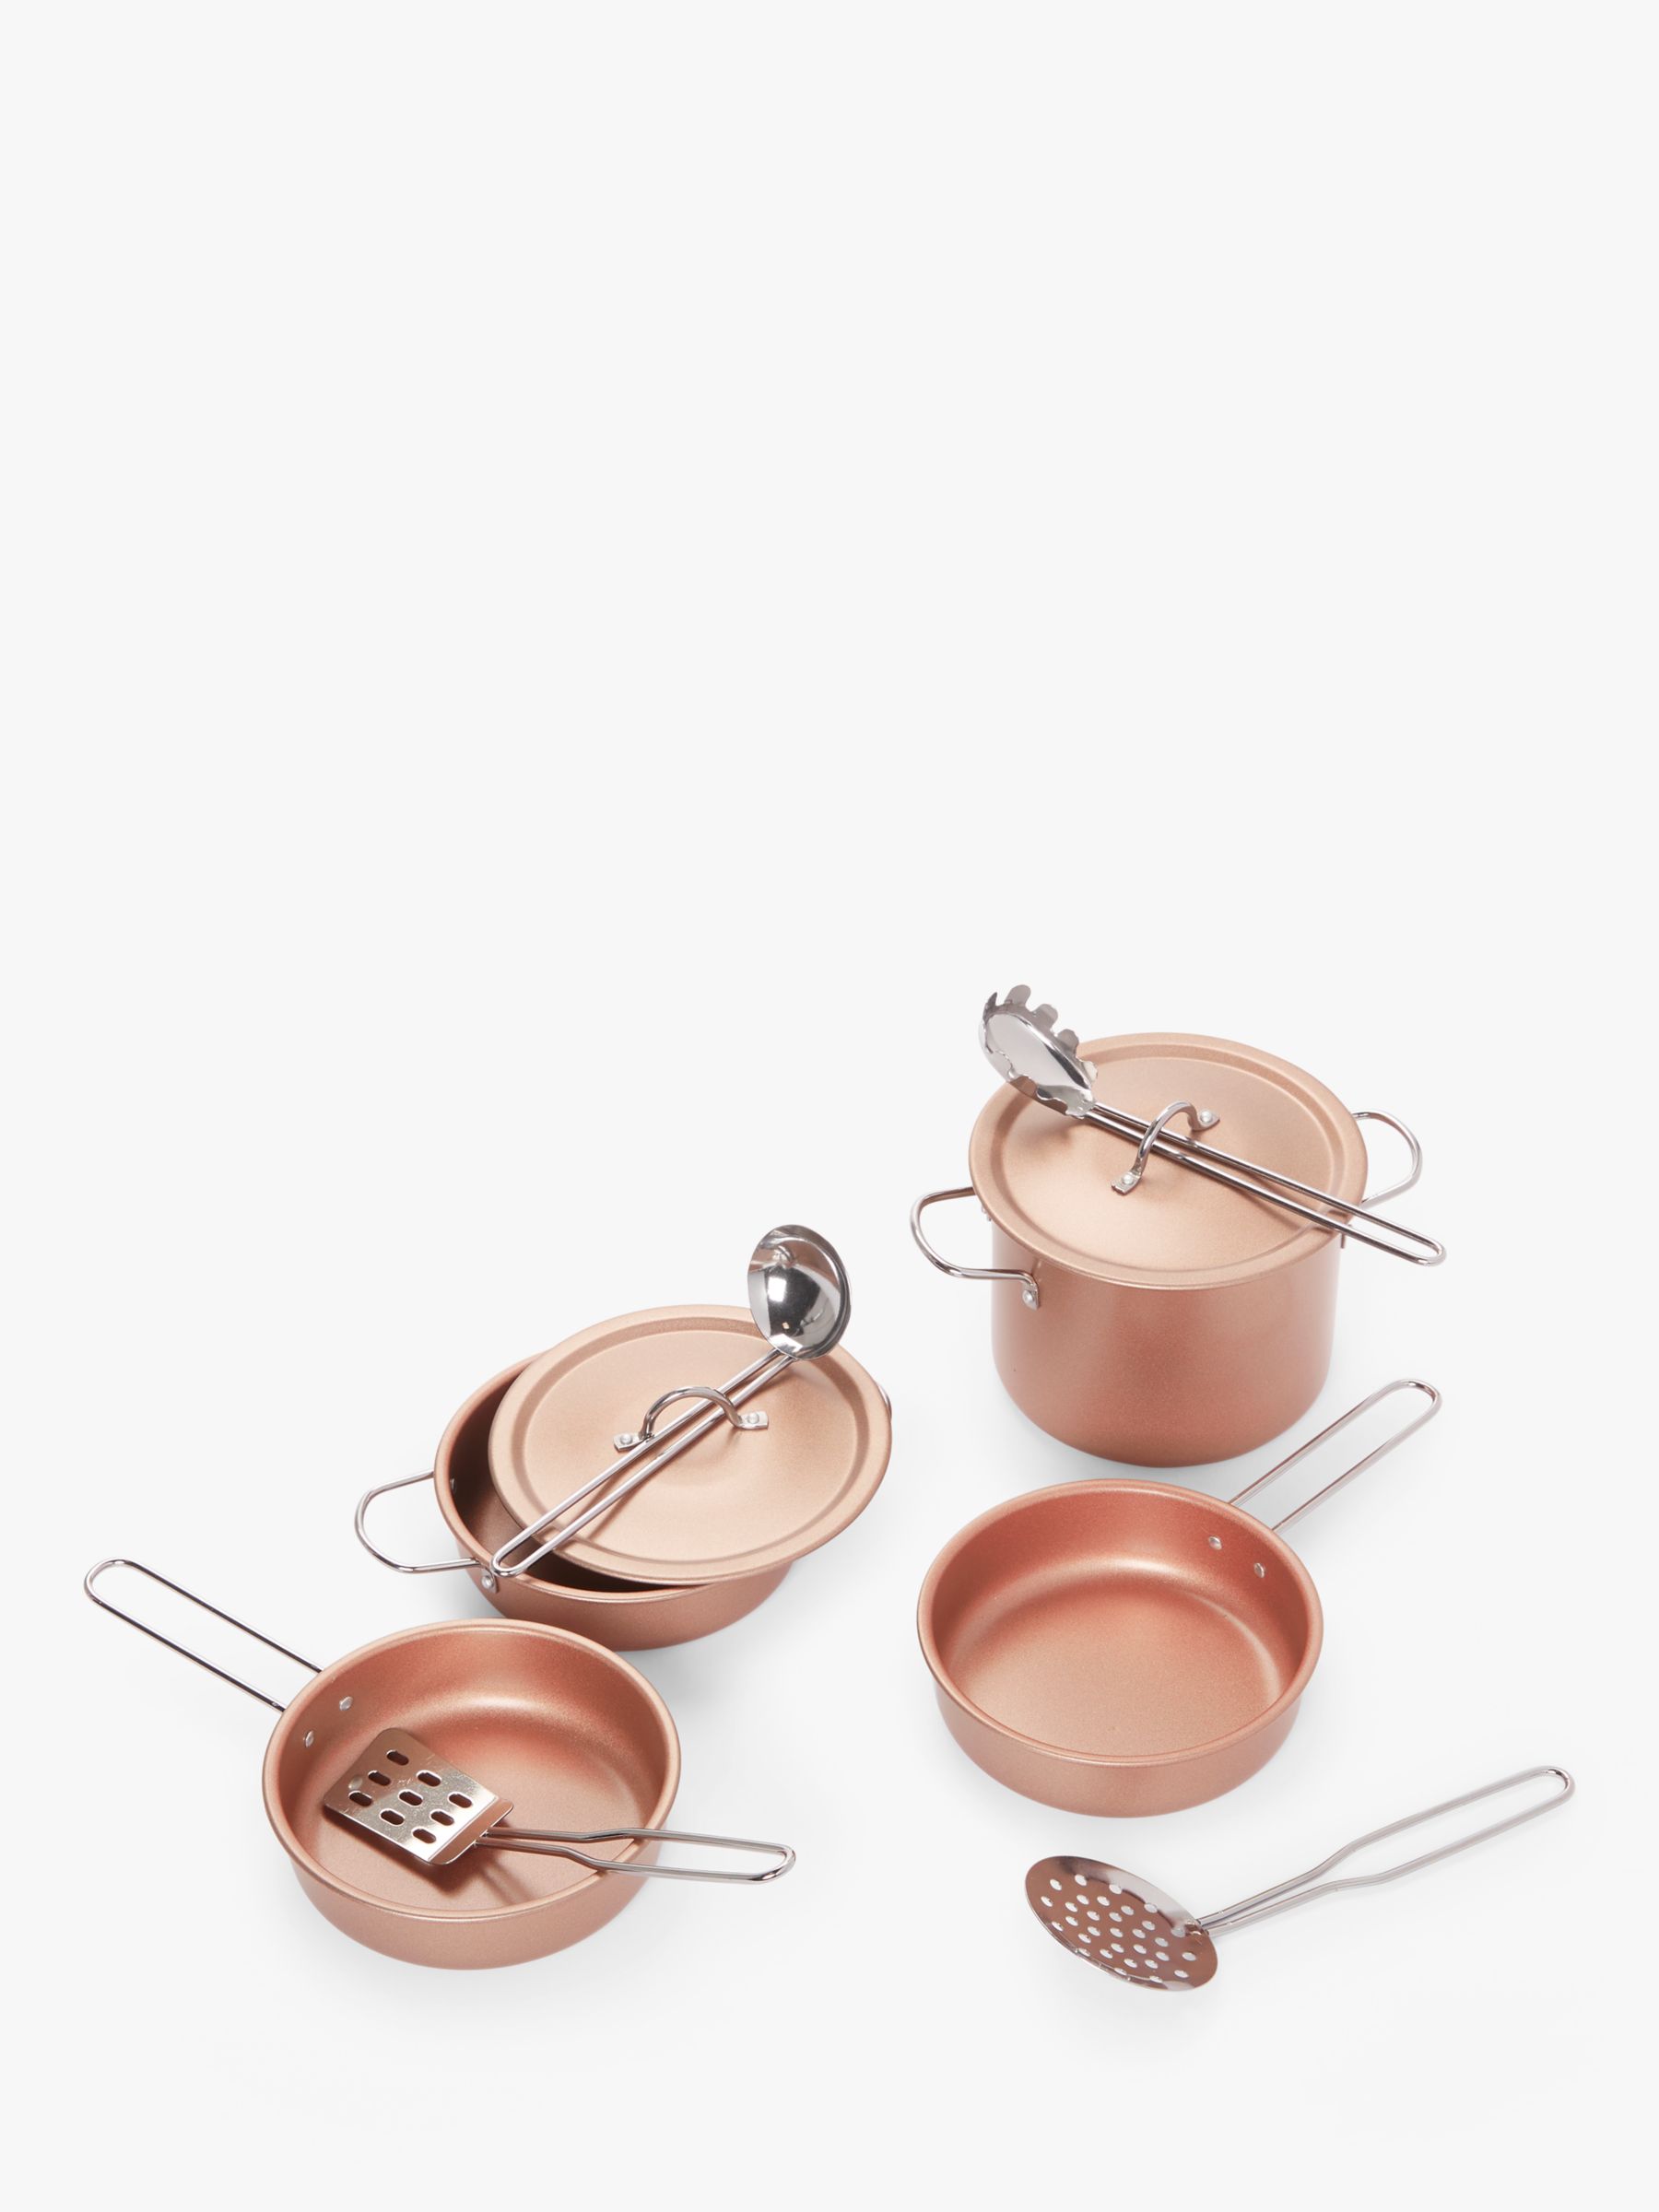 metal toy pots and pans